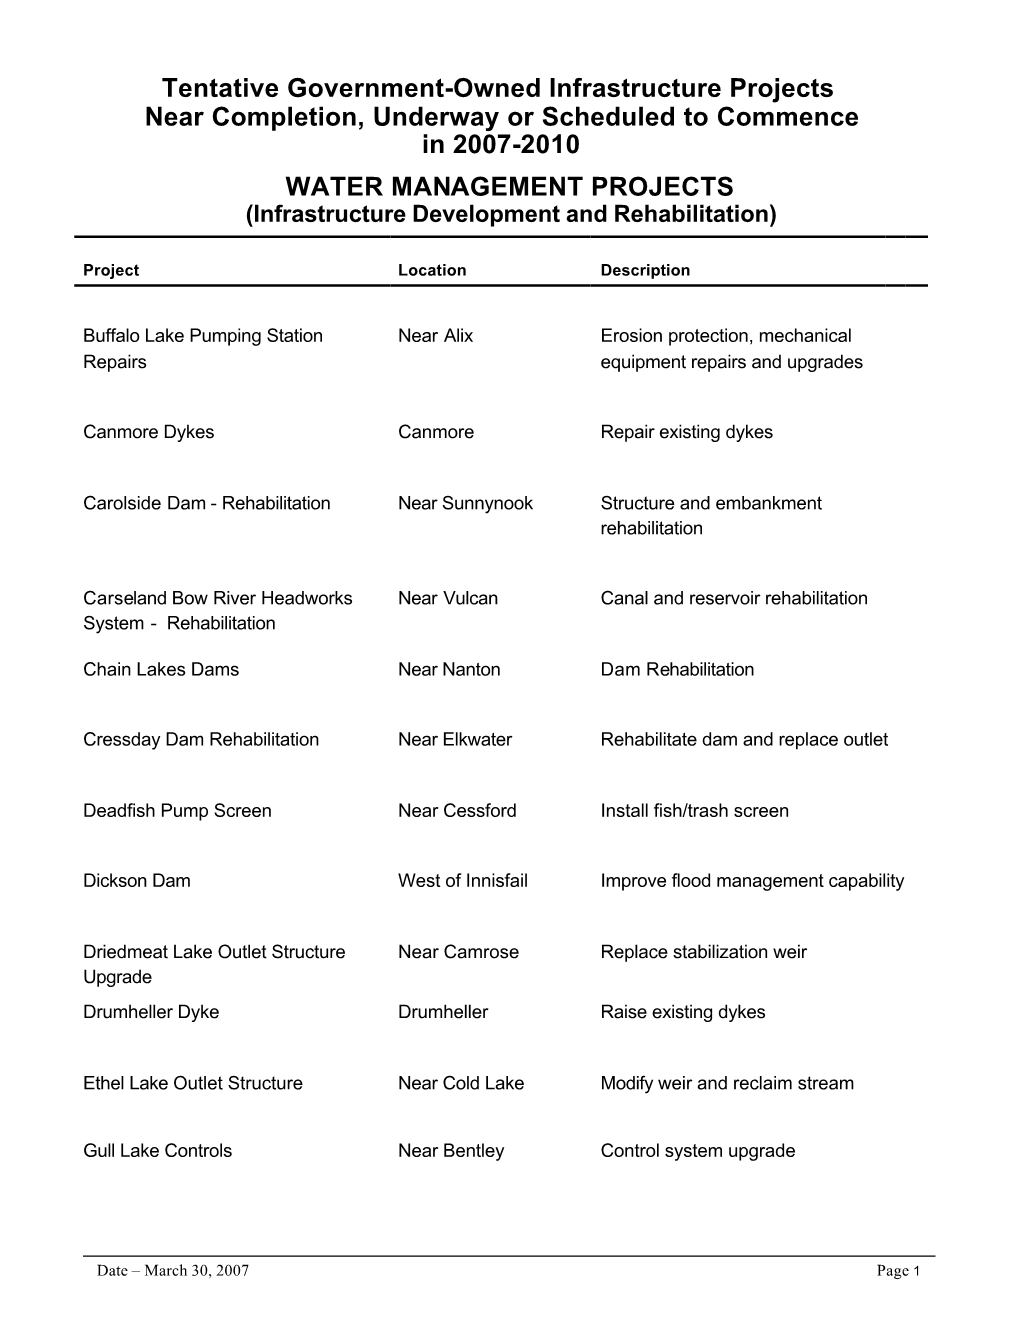 WATER MANAGEMENT PROJECTS (Infrastructure Development and Rehabilitation)